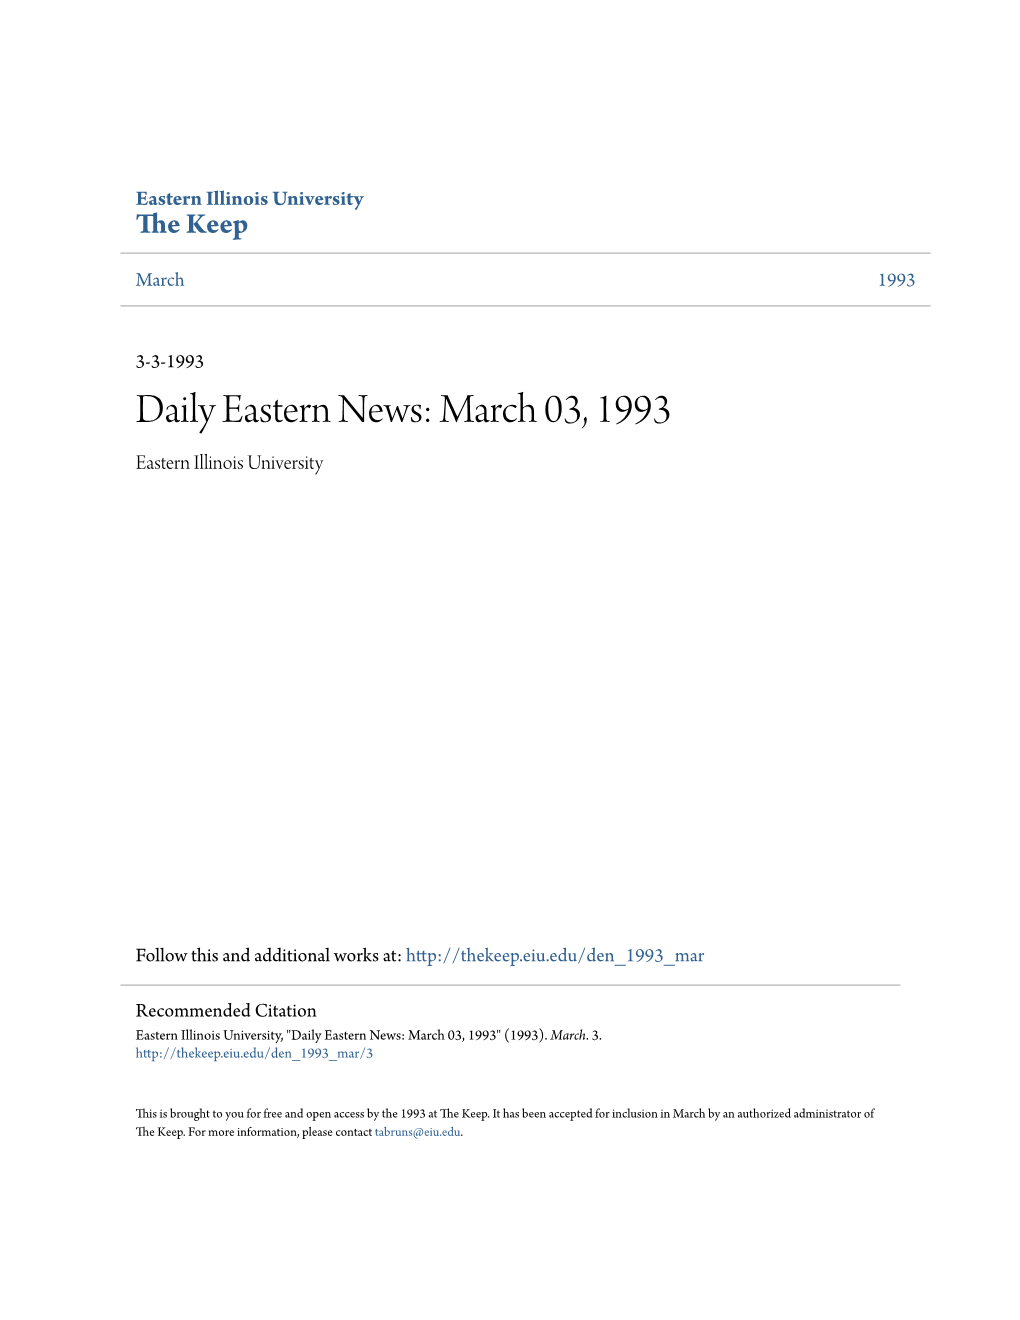 Daily Eastern News: March 03, 1993 Eastern Illinois University